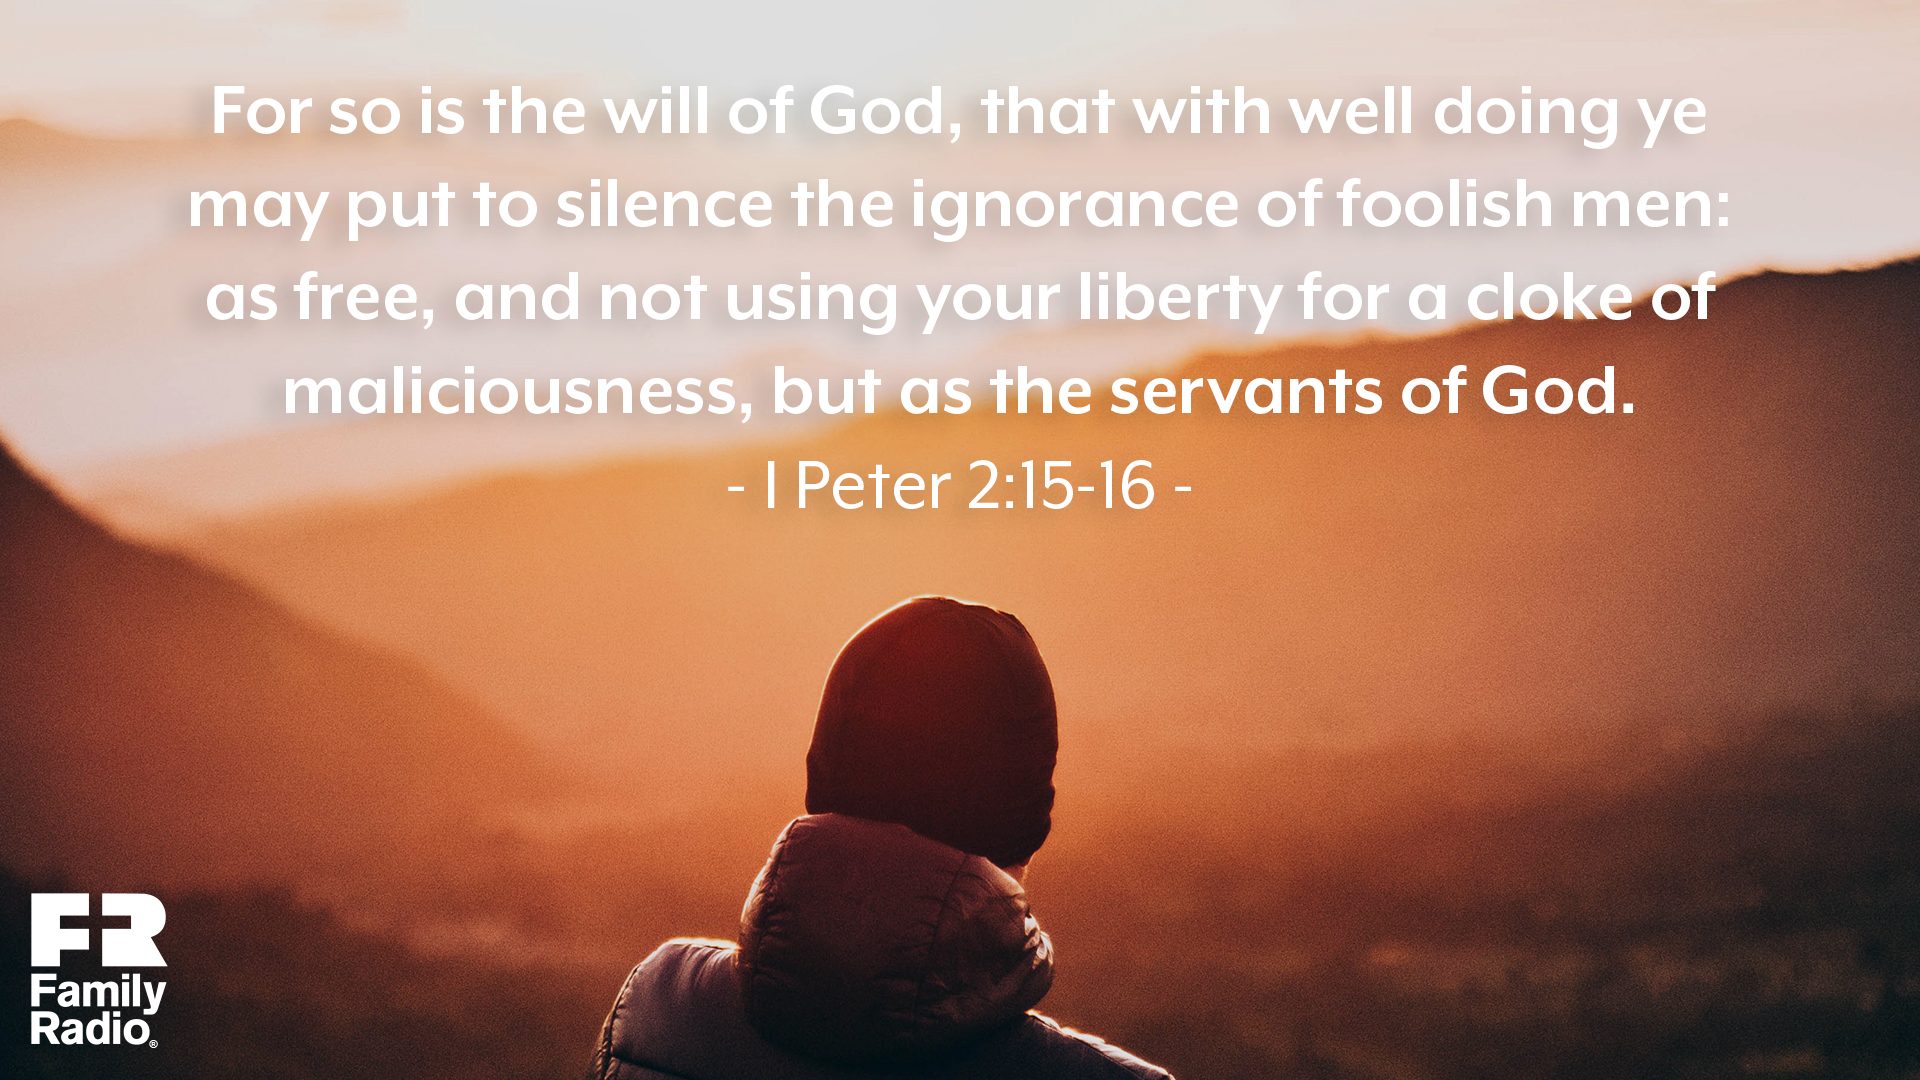 "For so is the will of God, that with well doing ye may put to silence the ignorance of foolish men: As free, and not using your liberty for a cloke of maliciousness, but as the servants of God."